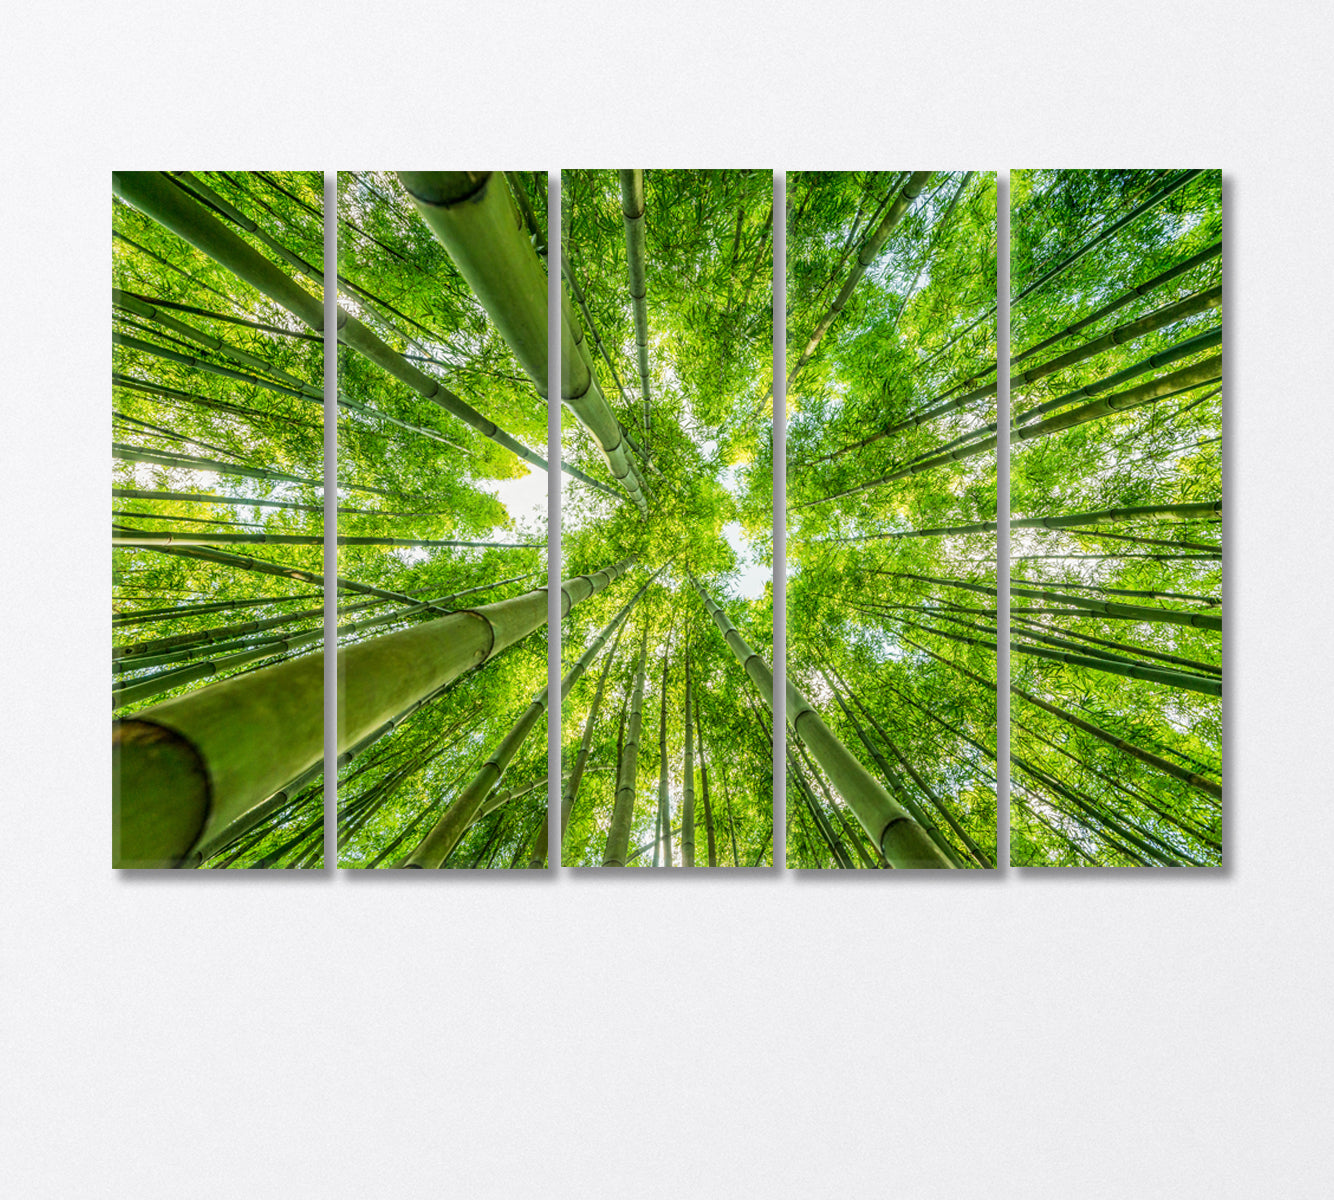 Green Bamboo Forest Bottom View Canvas Print-Canvas Print-CetArt-5 Panels-36x24 inches-CetArt